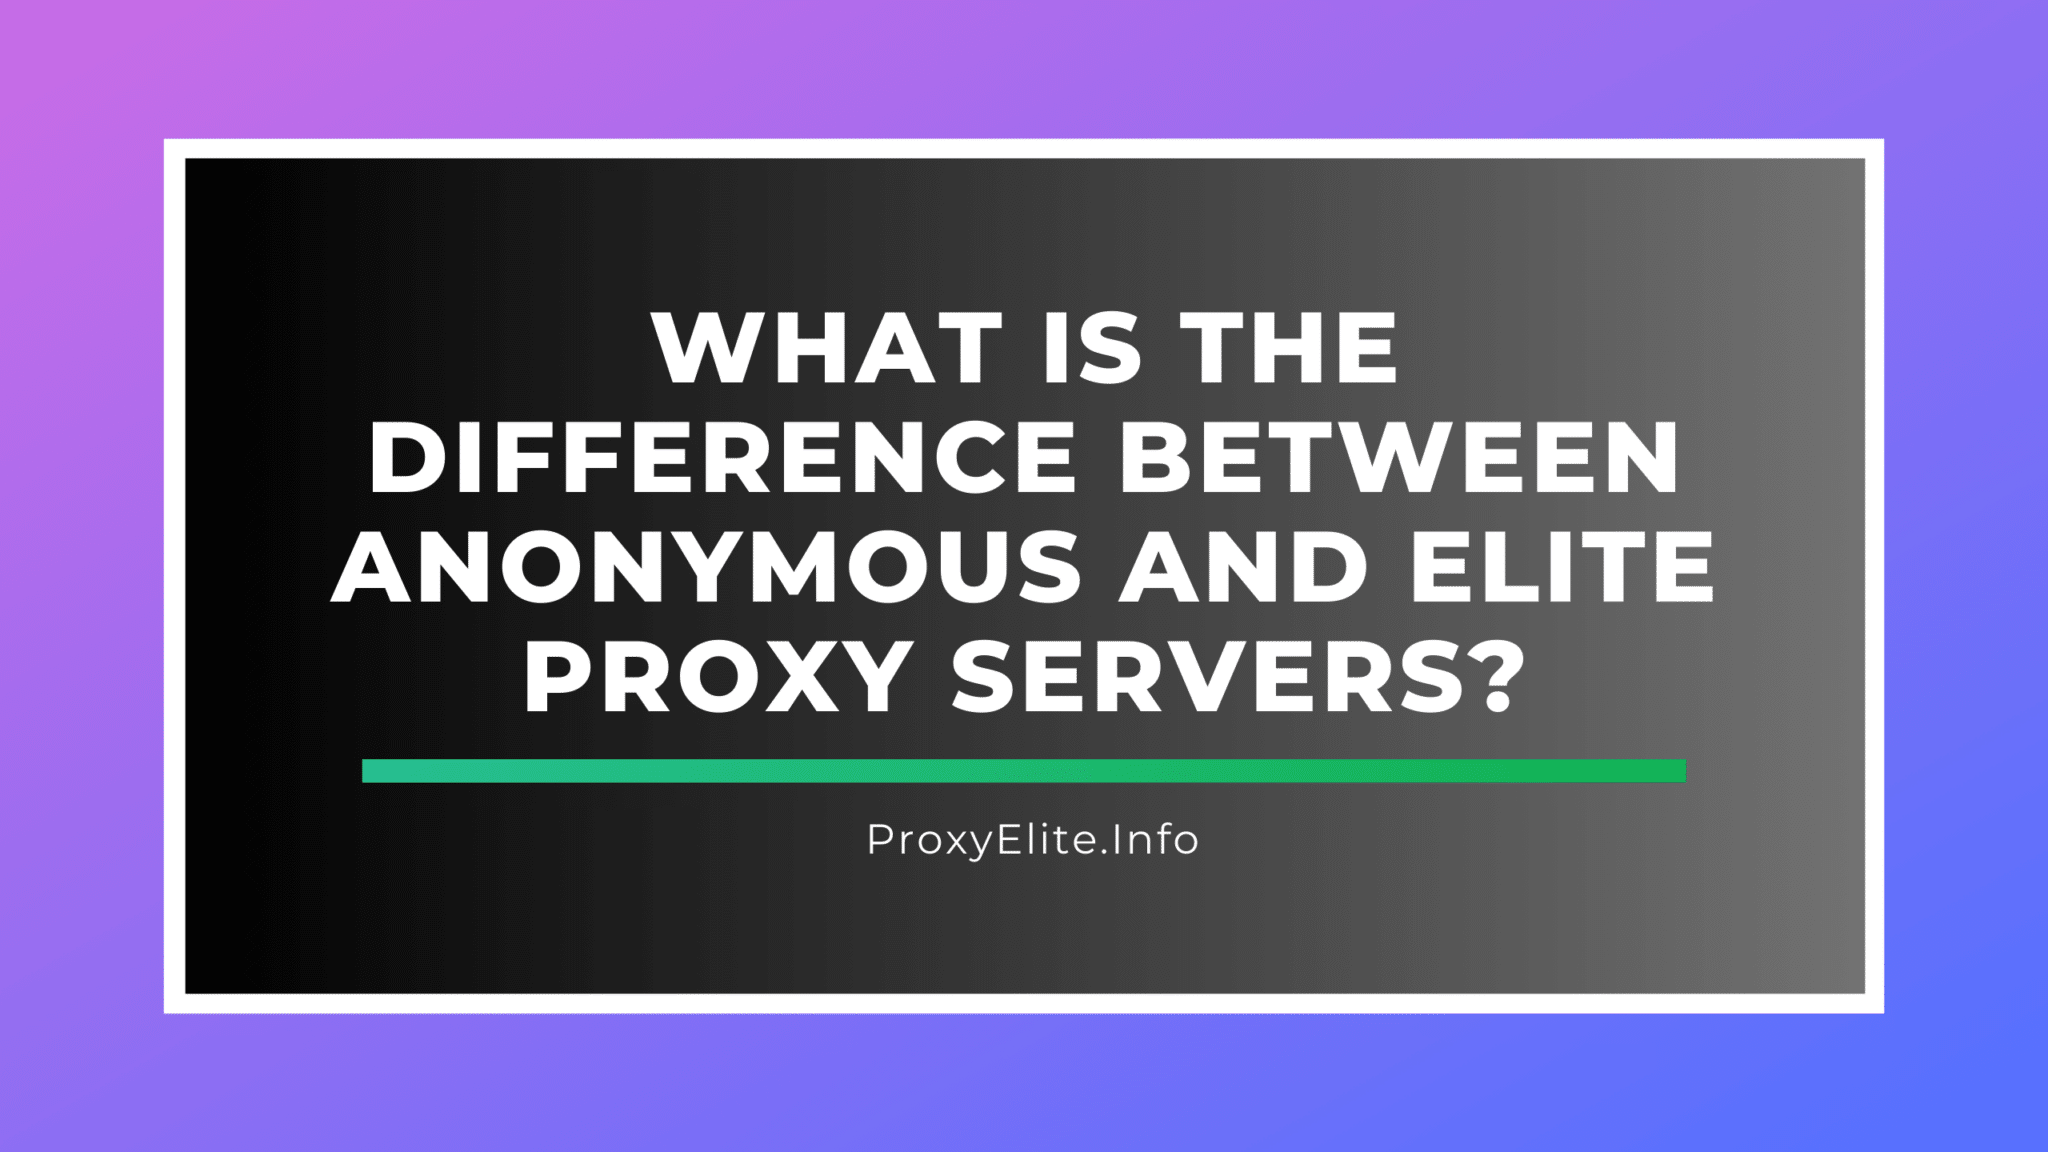 What is the Difference Between Anonymous and Elite Proxy Servers?